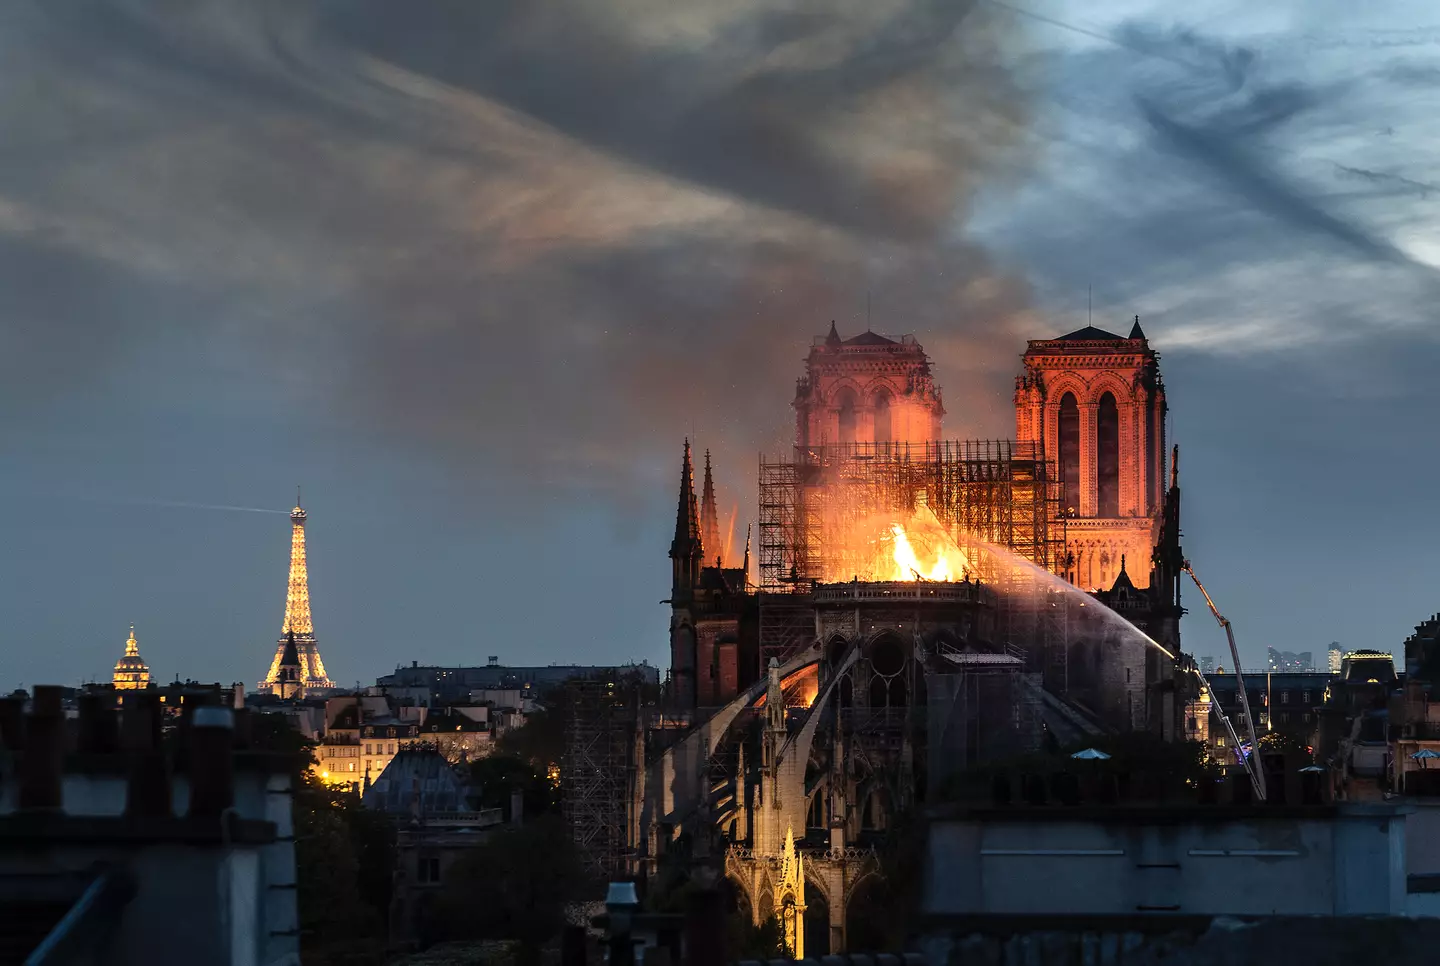 The cathedral caught fire back in 2019.